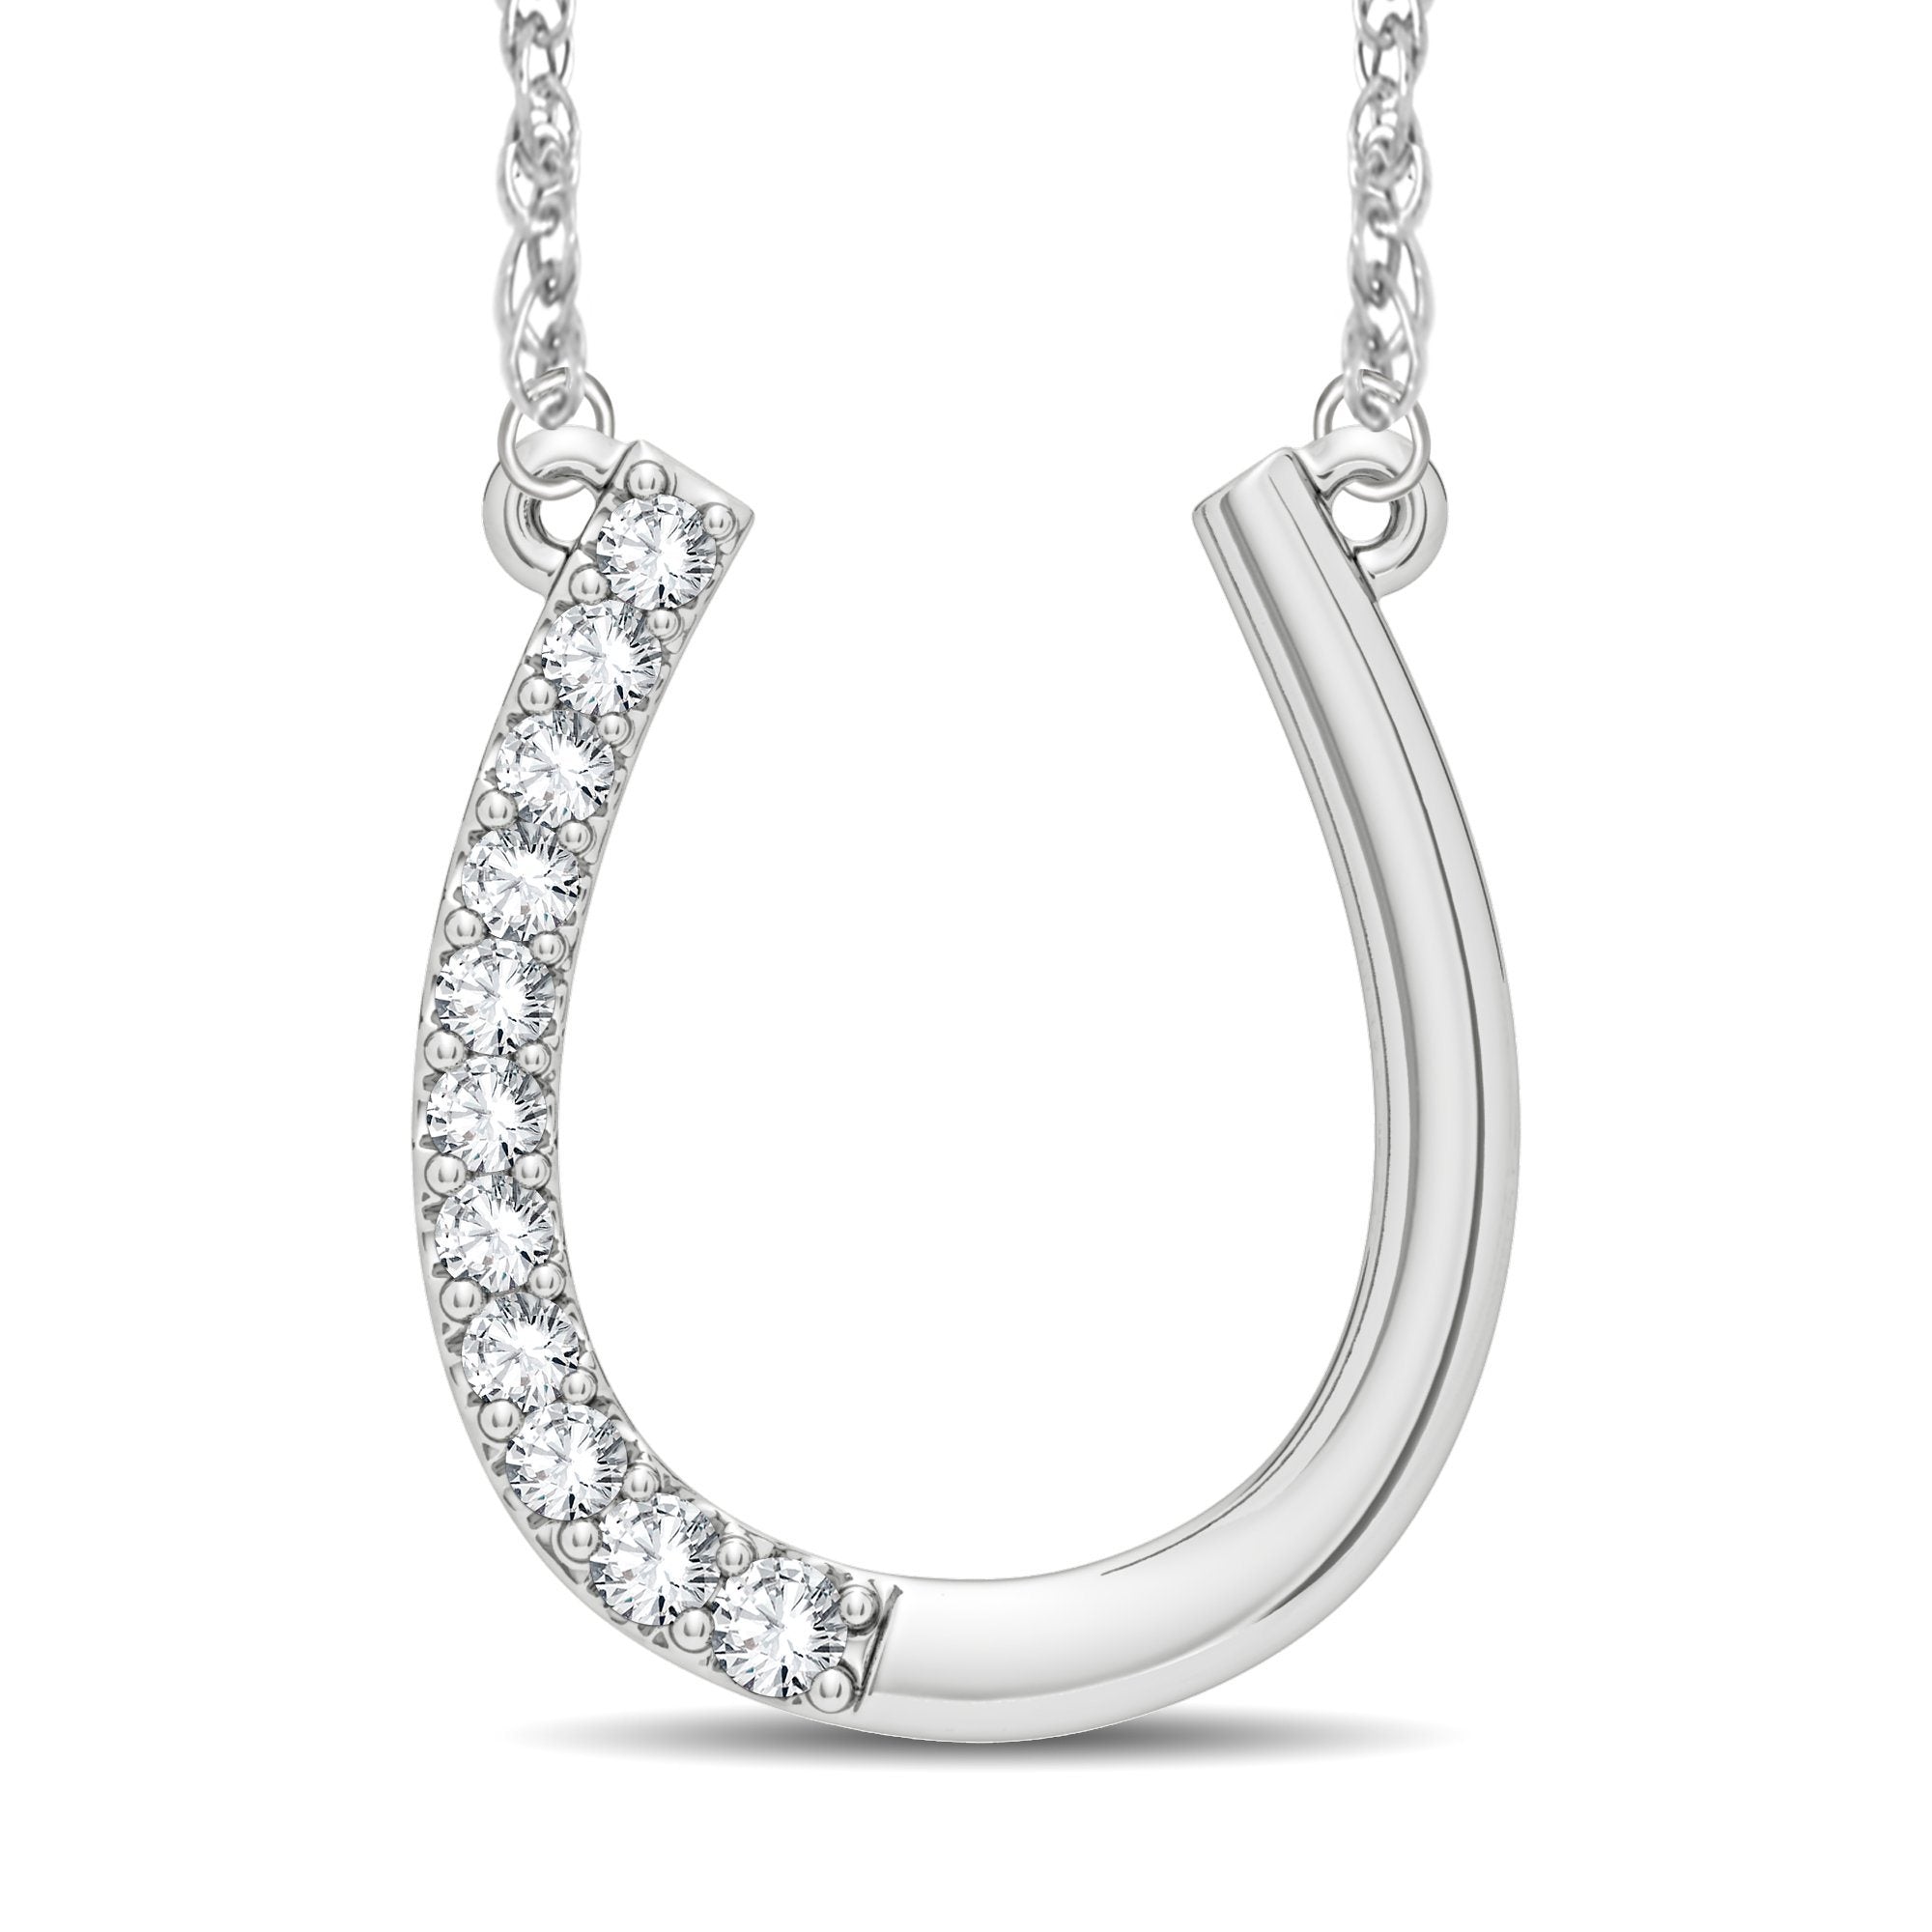 Horseshoe Necklace with 0.15ct of Diamonds in Sterling Silver Necklaces Bevilles 